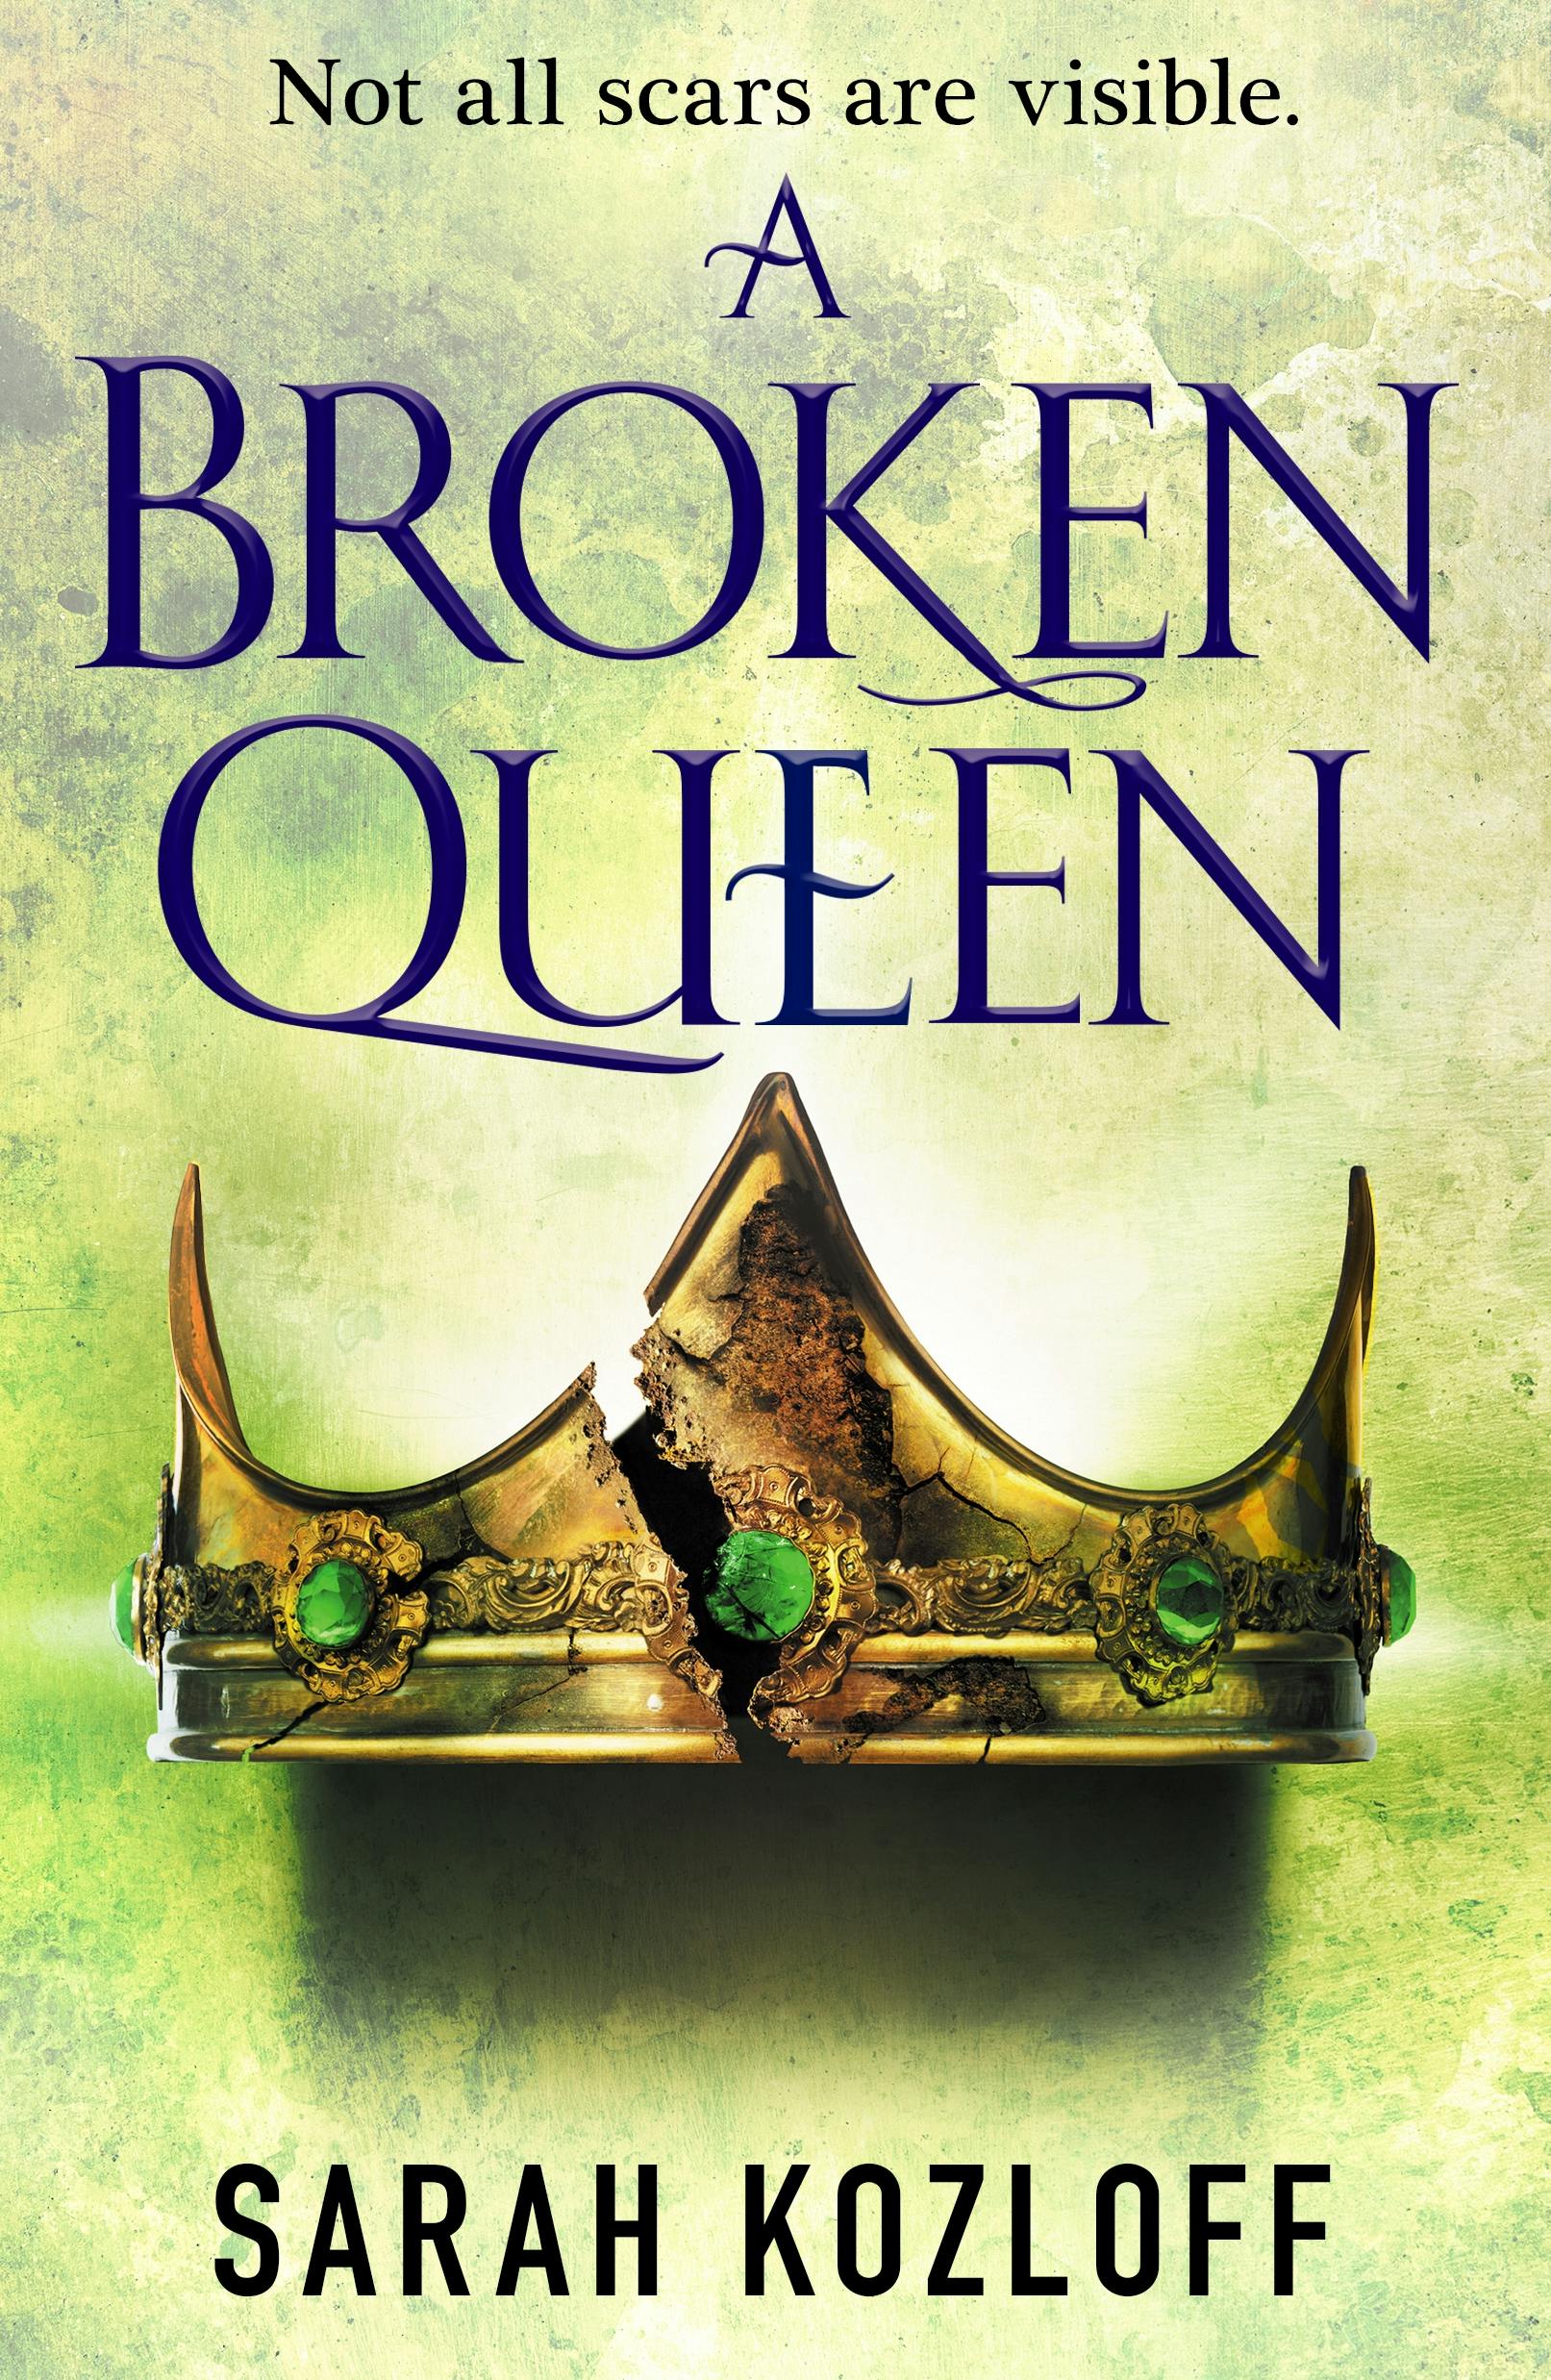 Cover for the book titled as: A Broken Queen